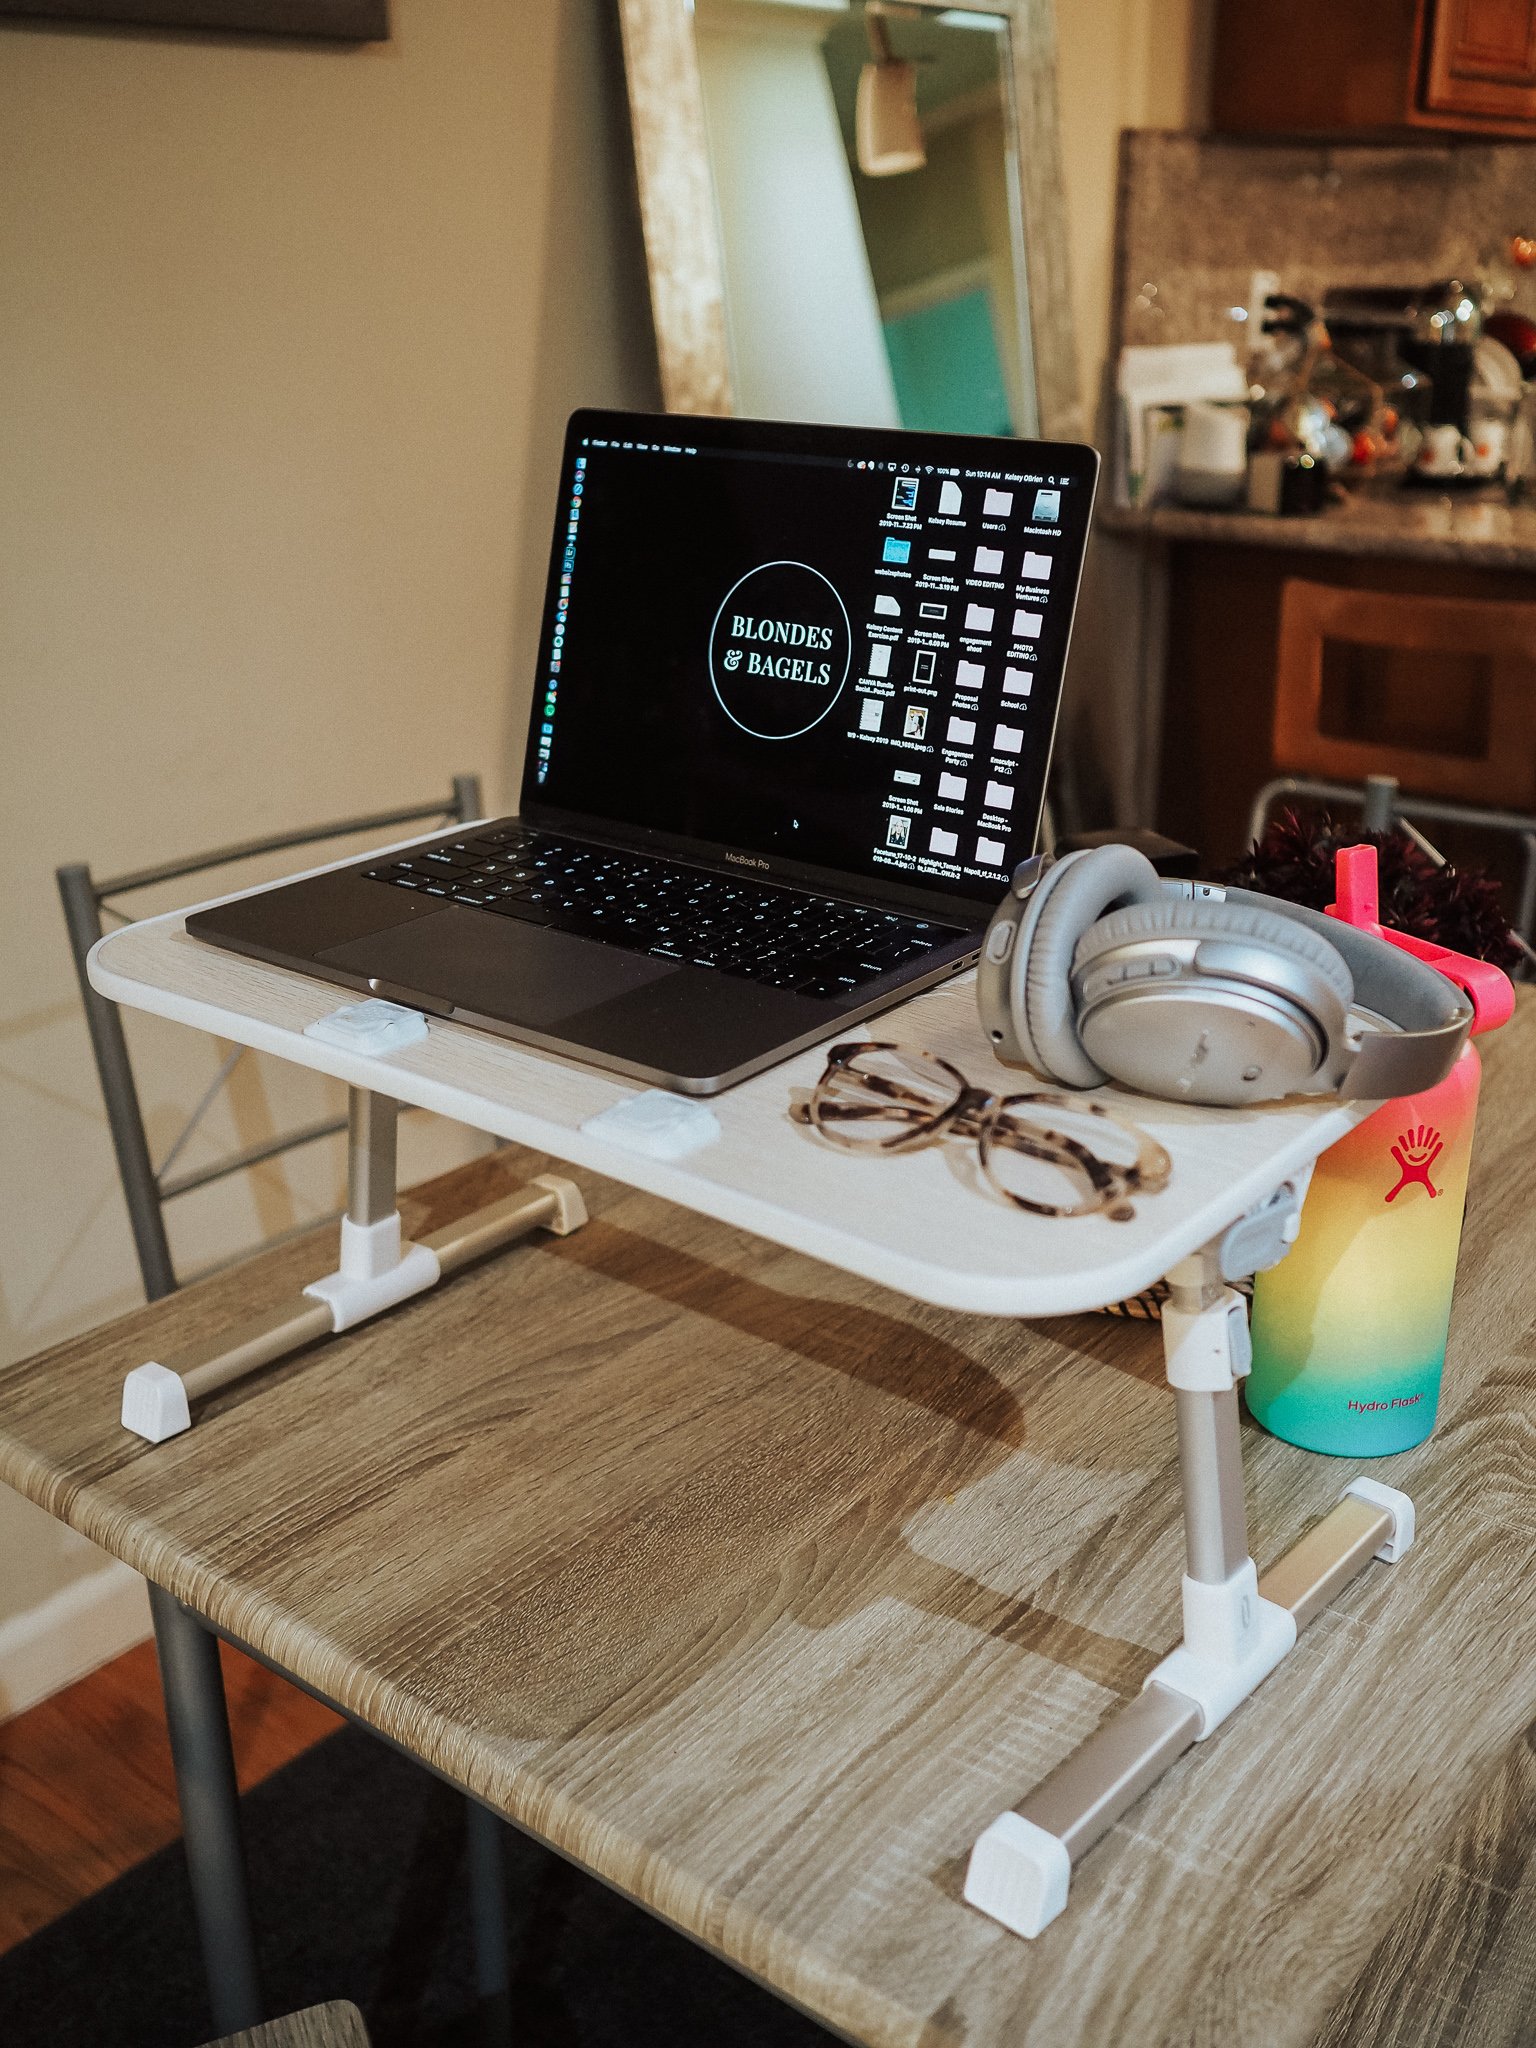 Lifestyle blogger Kelsey from Blondes and Bagels outlines the benefits of using a laptop stand.